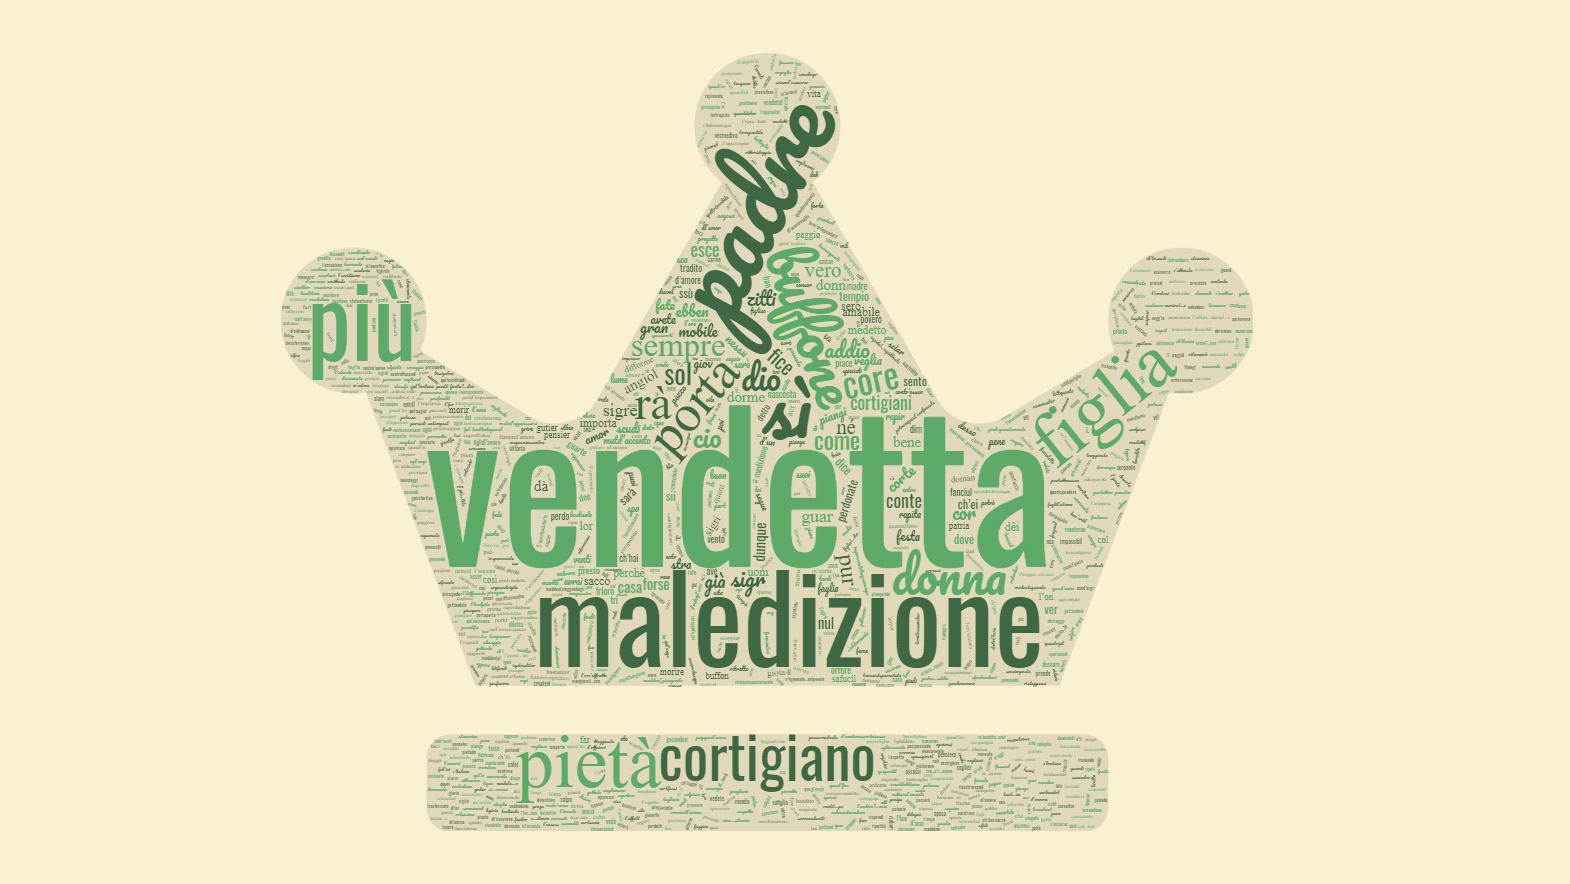 Word cloud, in the shape of a three-pointed hat, featuring Italian words like “vendetta,” “padre,” and “maledoizione,” colored in shades of green.